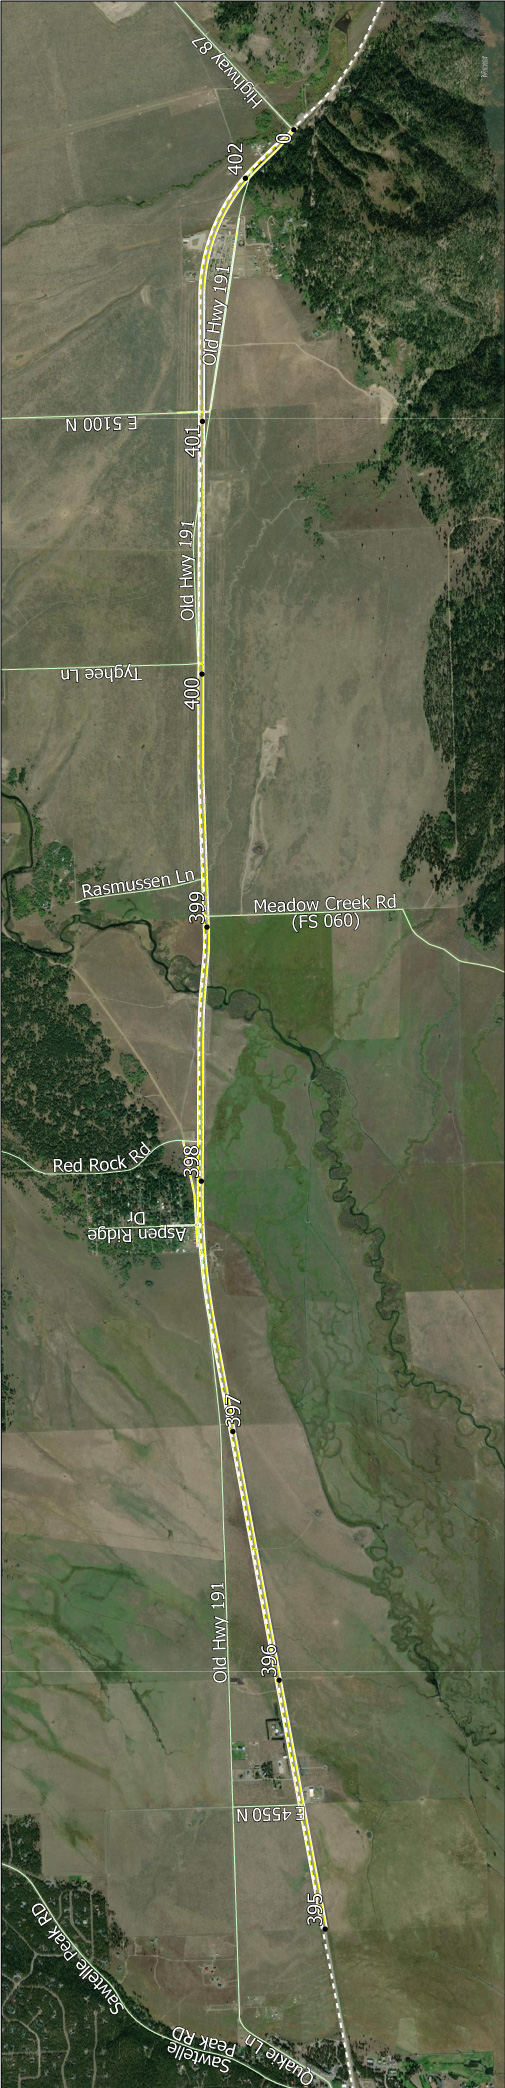 Map of Red Rock Road alternatives RR1.